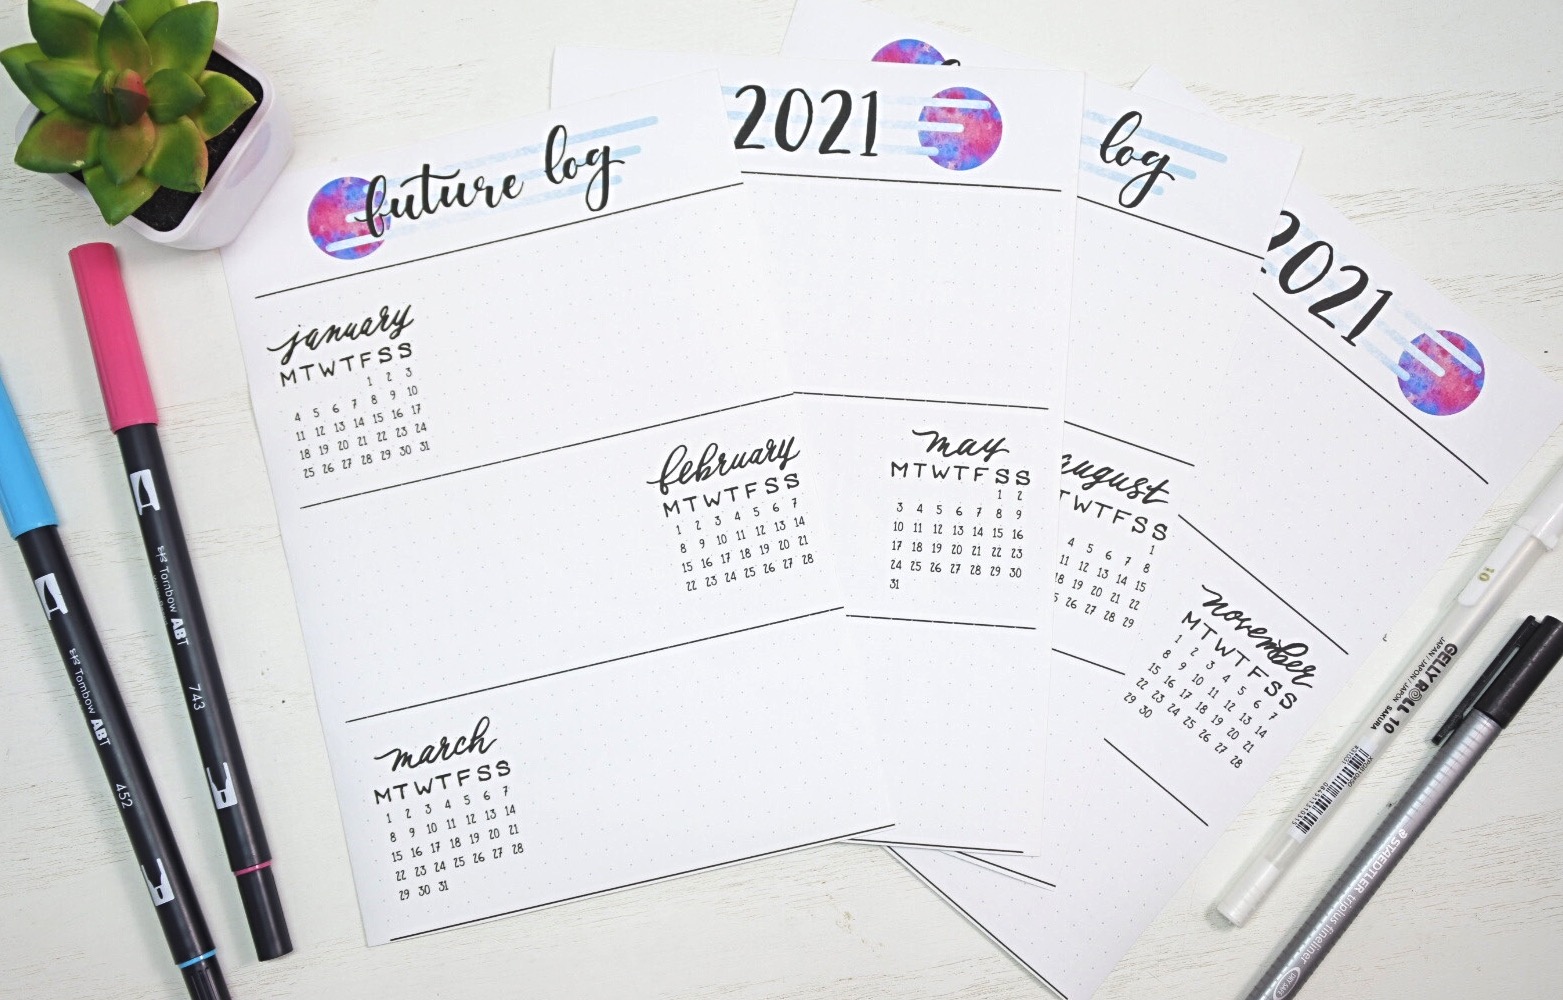 Bullet Journal Supplies for 2020⋆ Sheena of the Journal